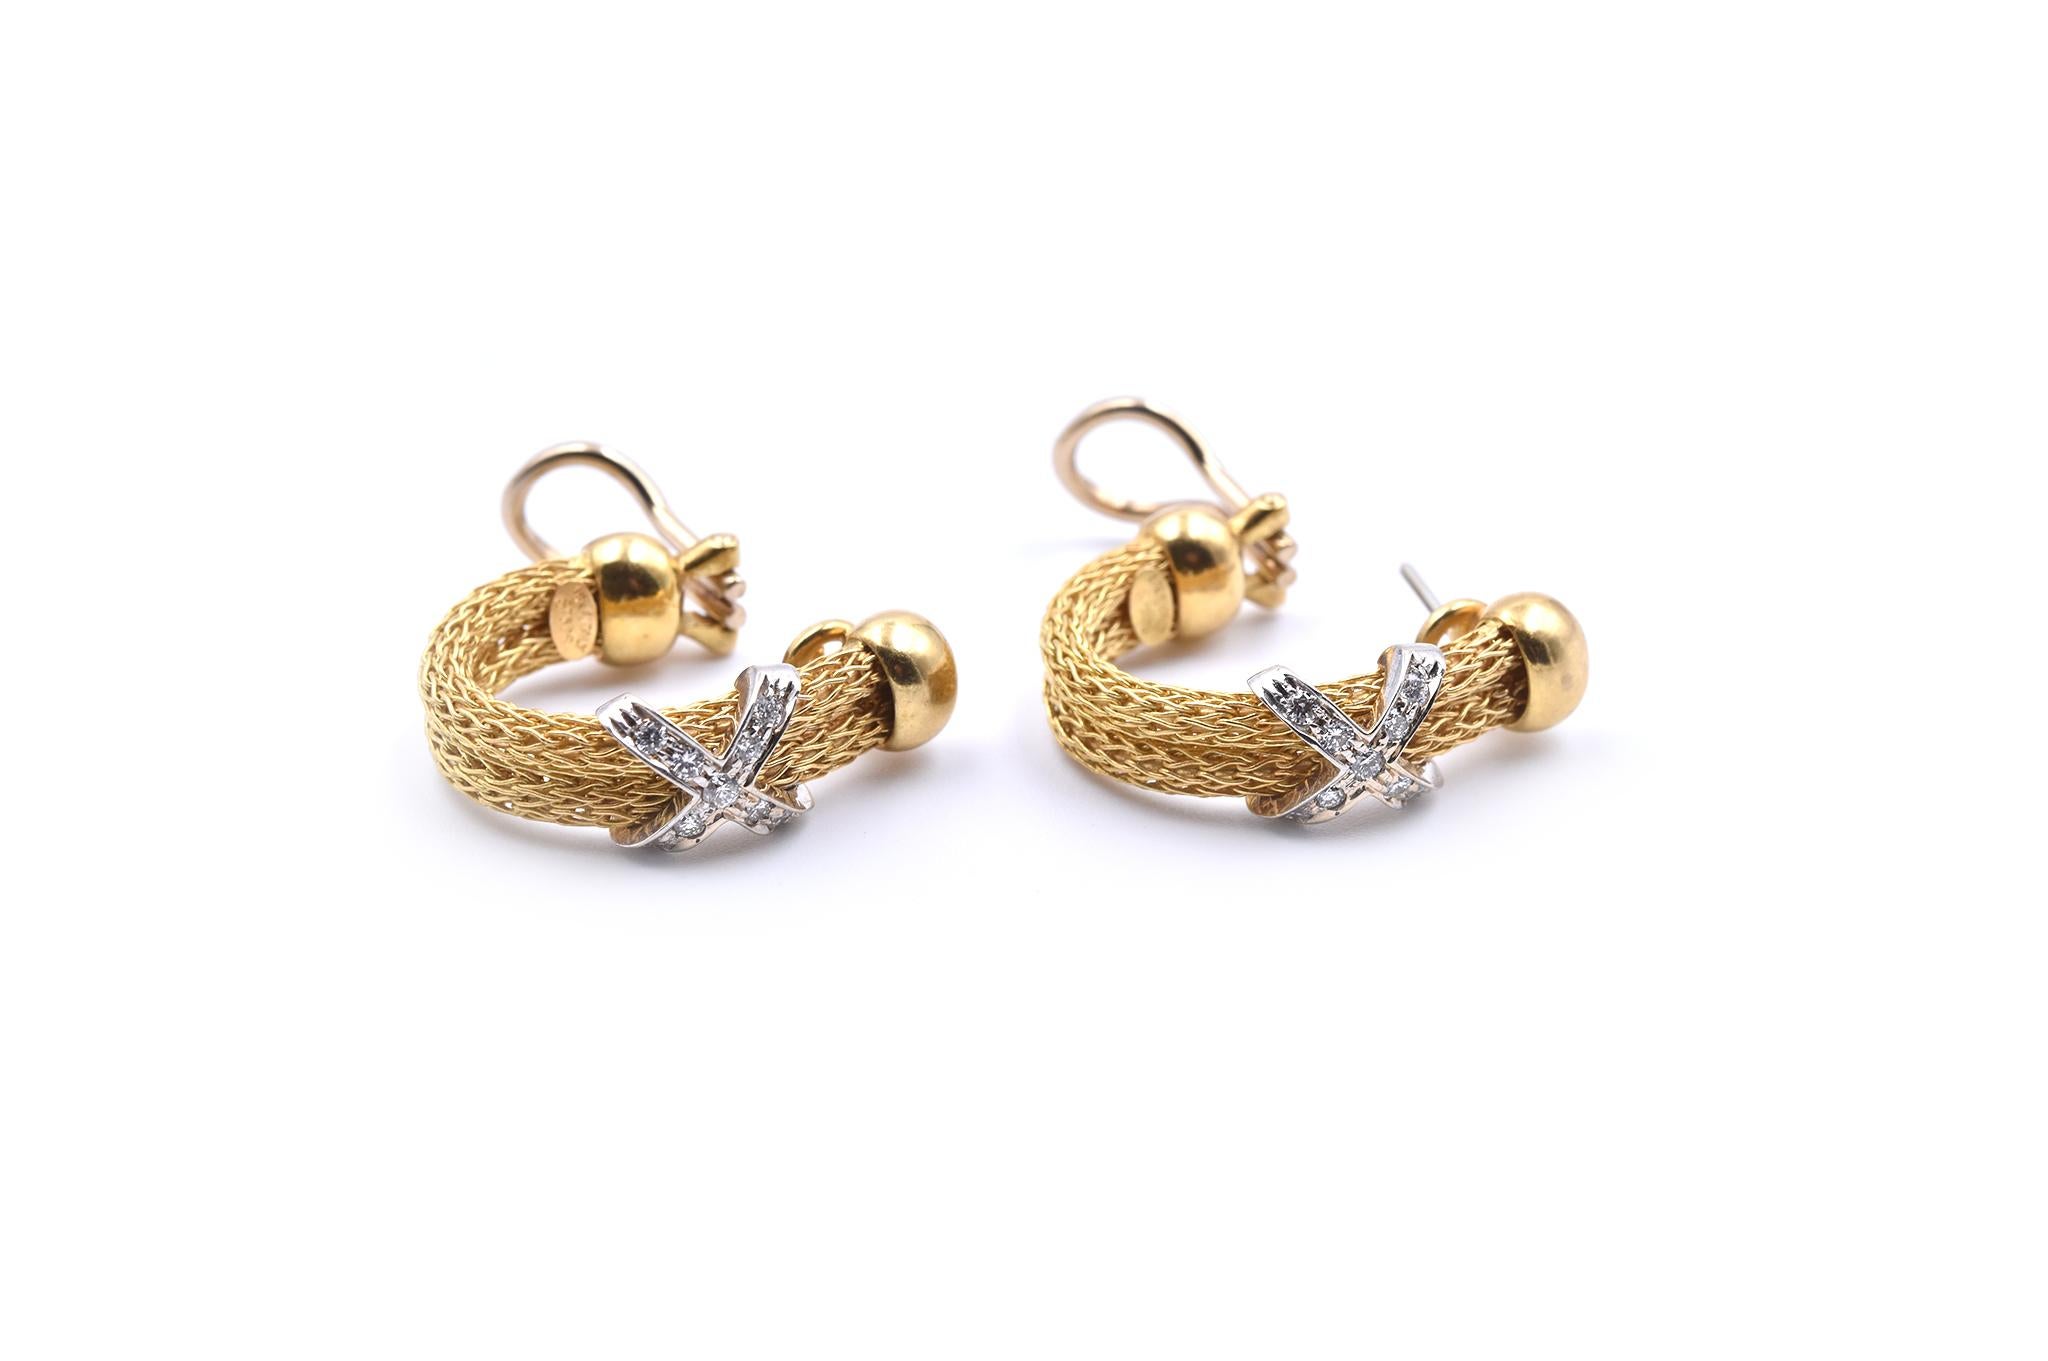 Designer: custom design
Material: 18k yellow gold (Italy)
Diamonds: 18 round brilliant cut = .60cttw
Color: G
Clarity: VS
Dimensions: earrings are approximately 24.50mm in length and 5.45mm wide
Fastenings: post with Omega back
Weight: 14.48 grams
